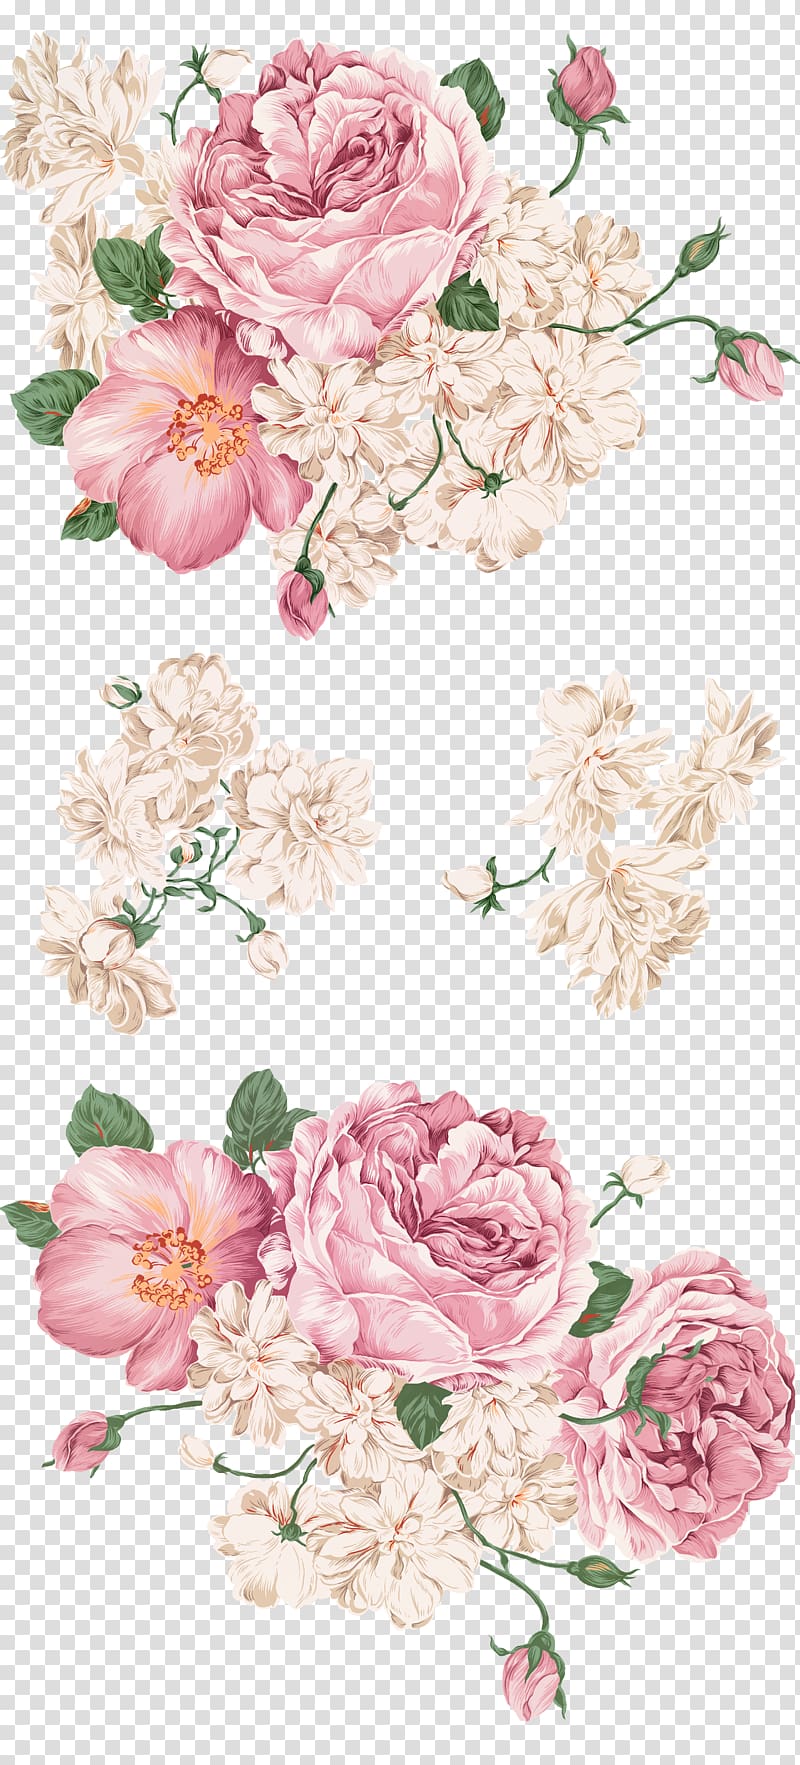 Peony Drawing Painting, Hand-painted peony, pink and white flowers transparent background PNG clipart